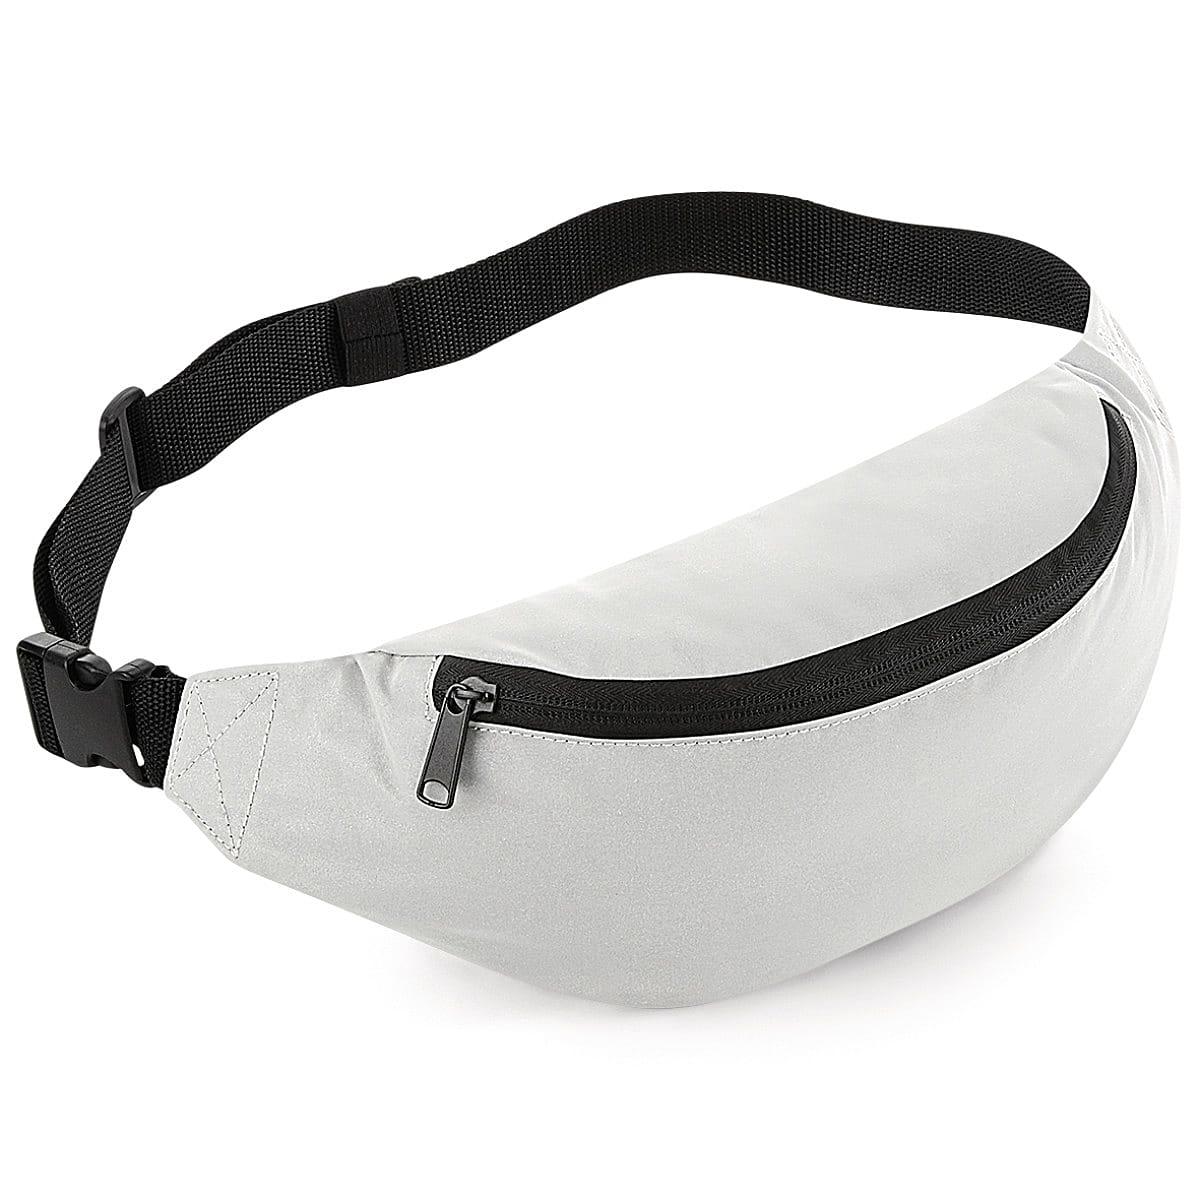 Bagbase Reflective Belt Bag in Silver Reflective (Product Code: BG134)